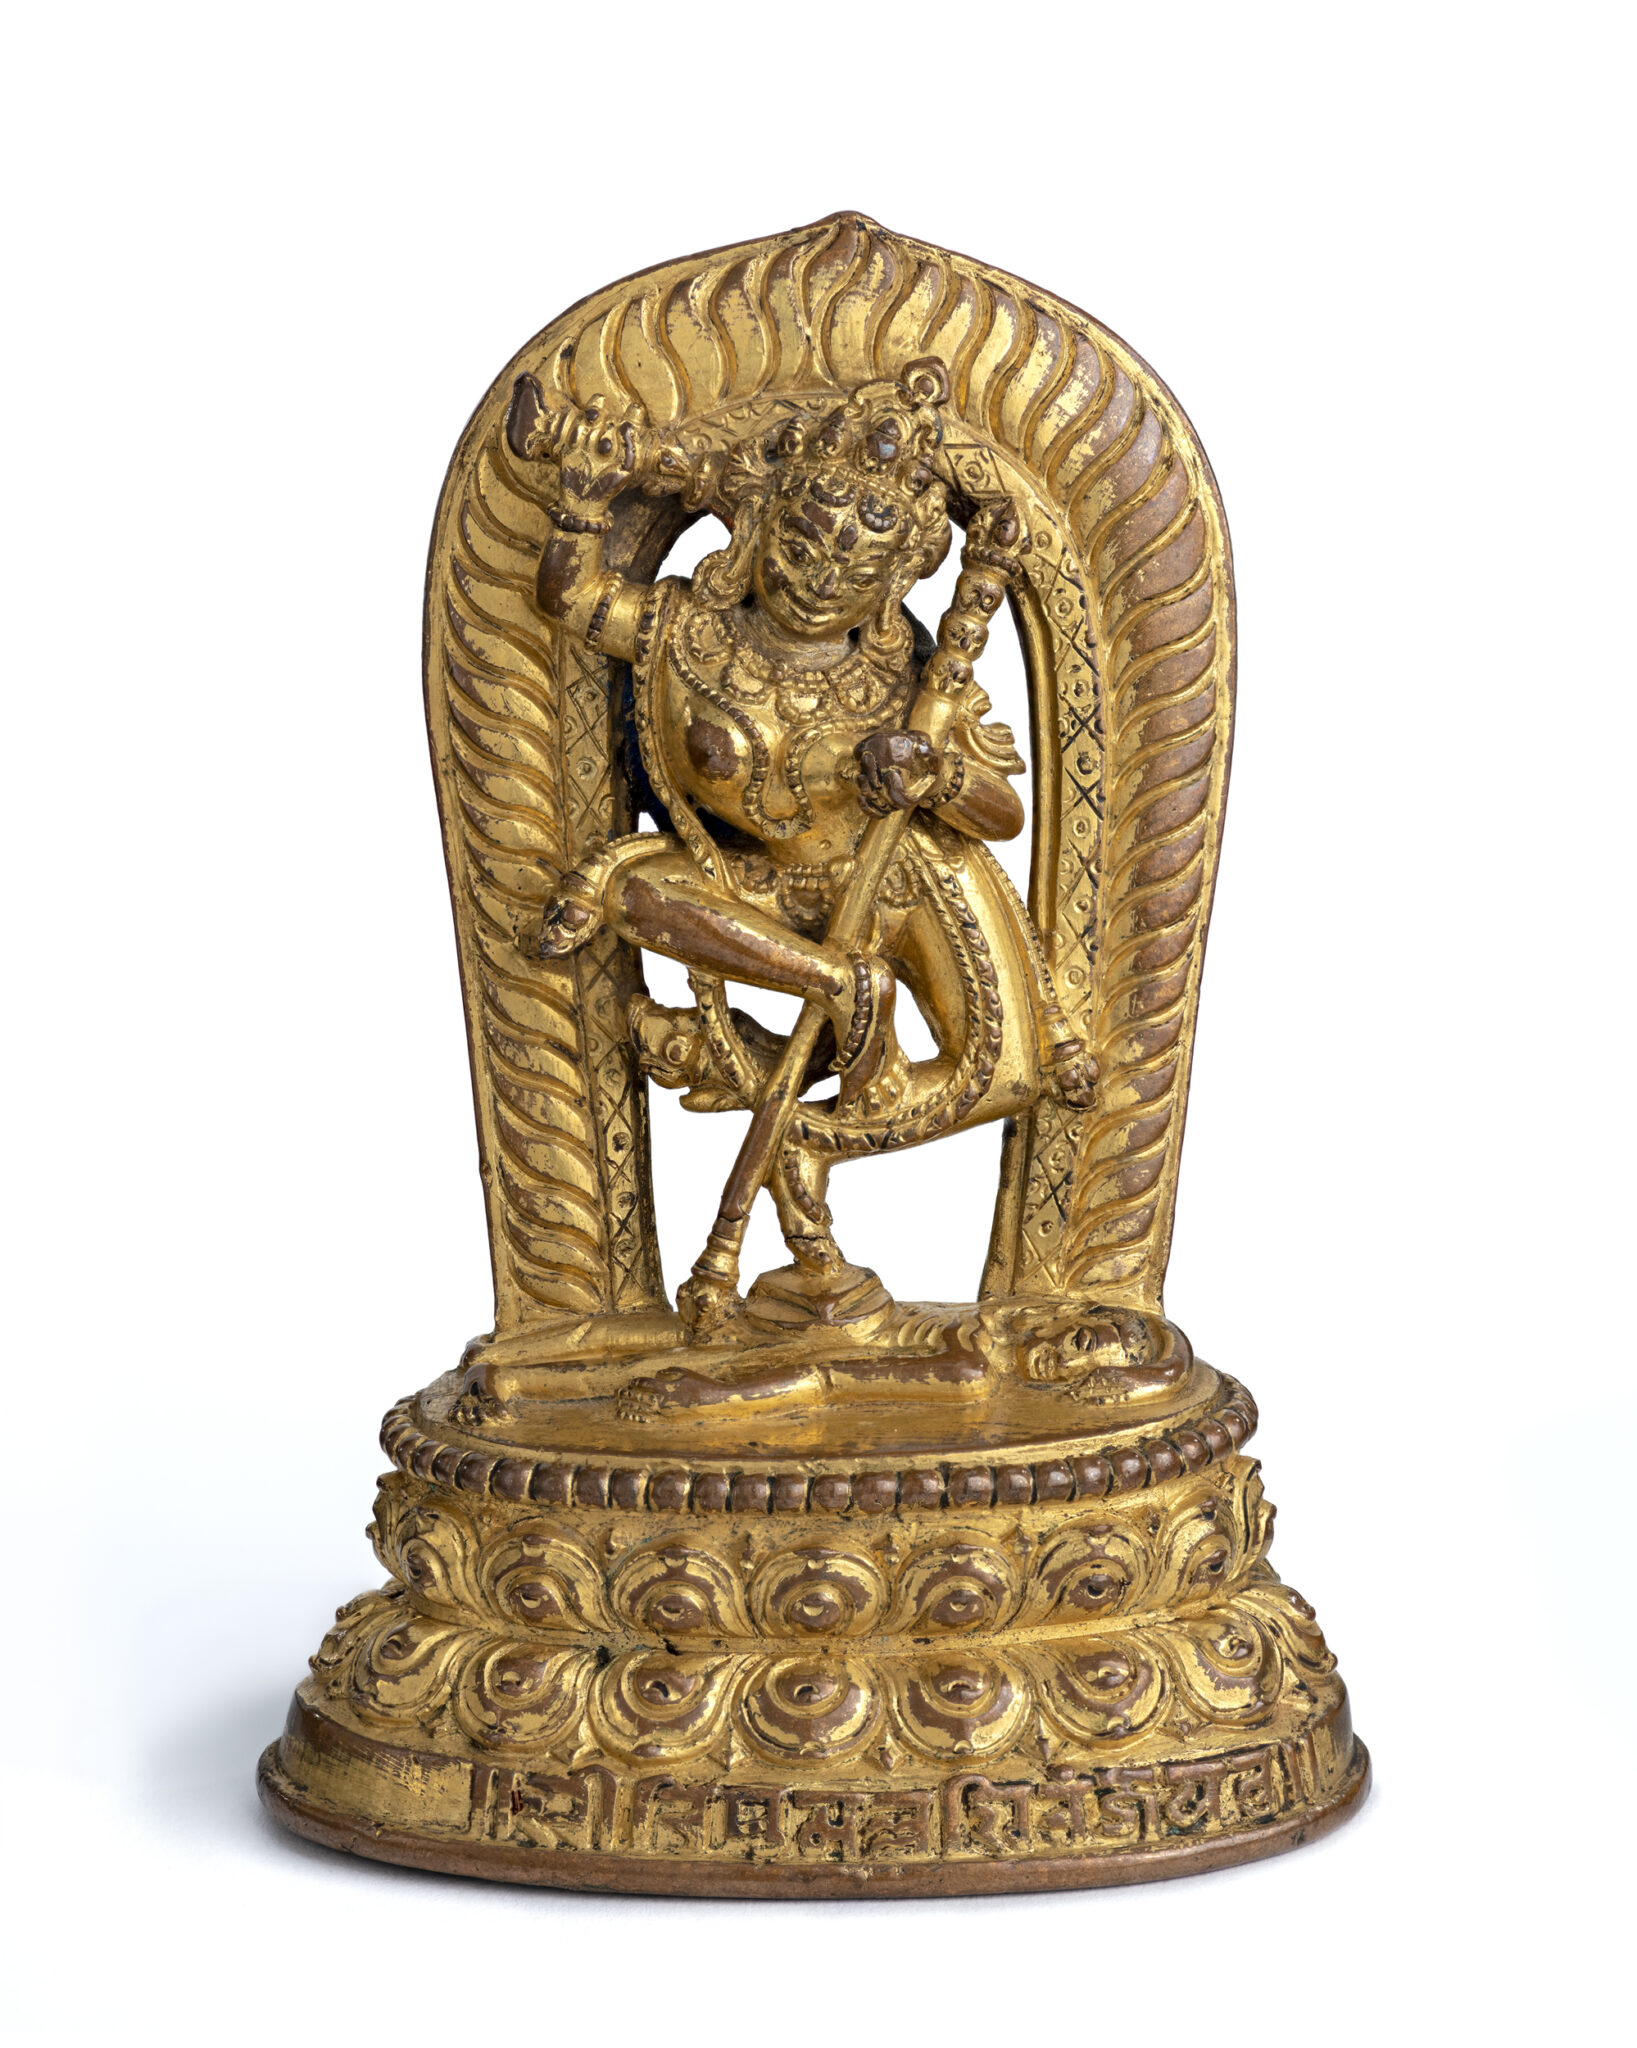 Gilded sculpture featuring dynamically posed deity standing atop supine figure before open fiery nimbus